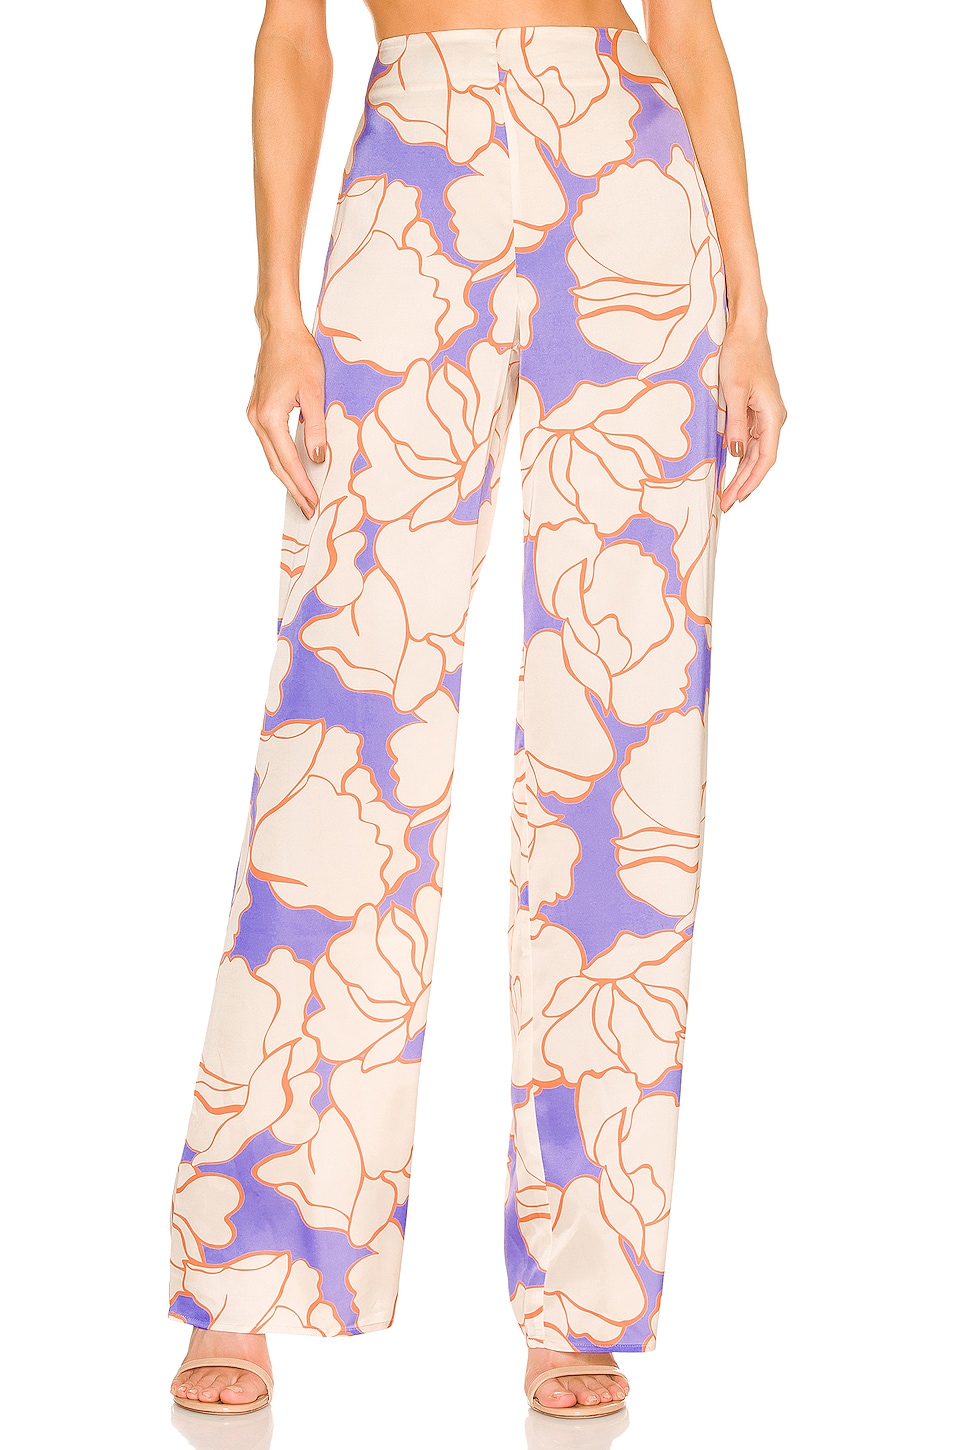 Alexis Willows Pant in Wisteria | REVOLVE